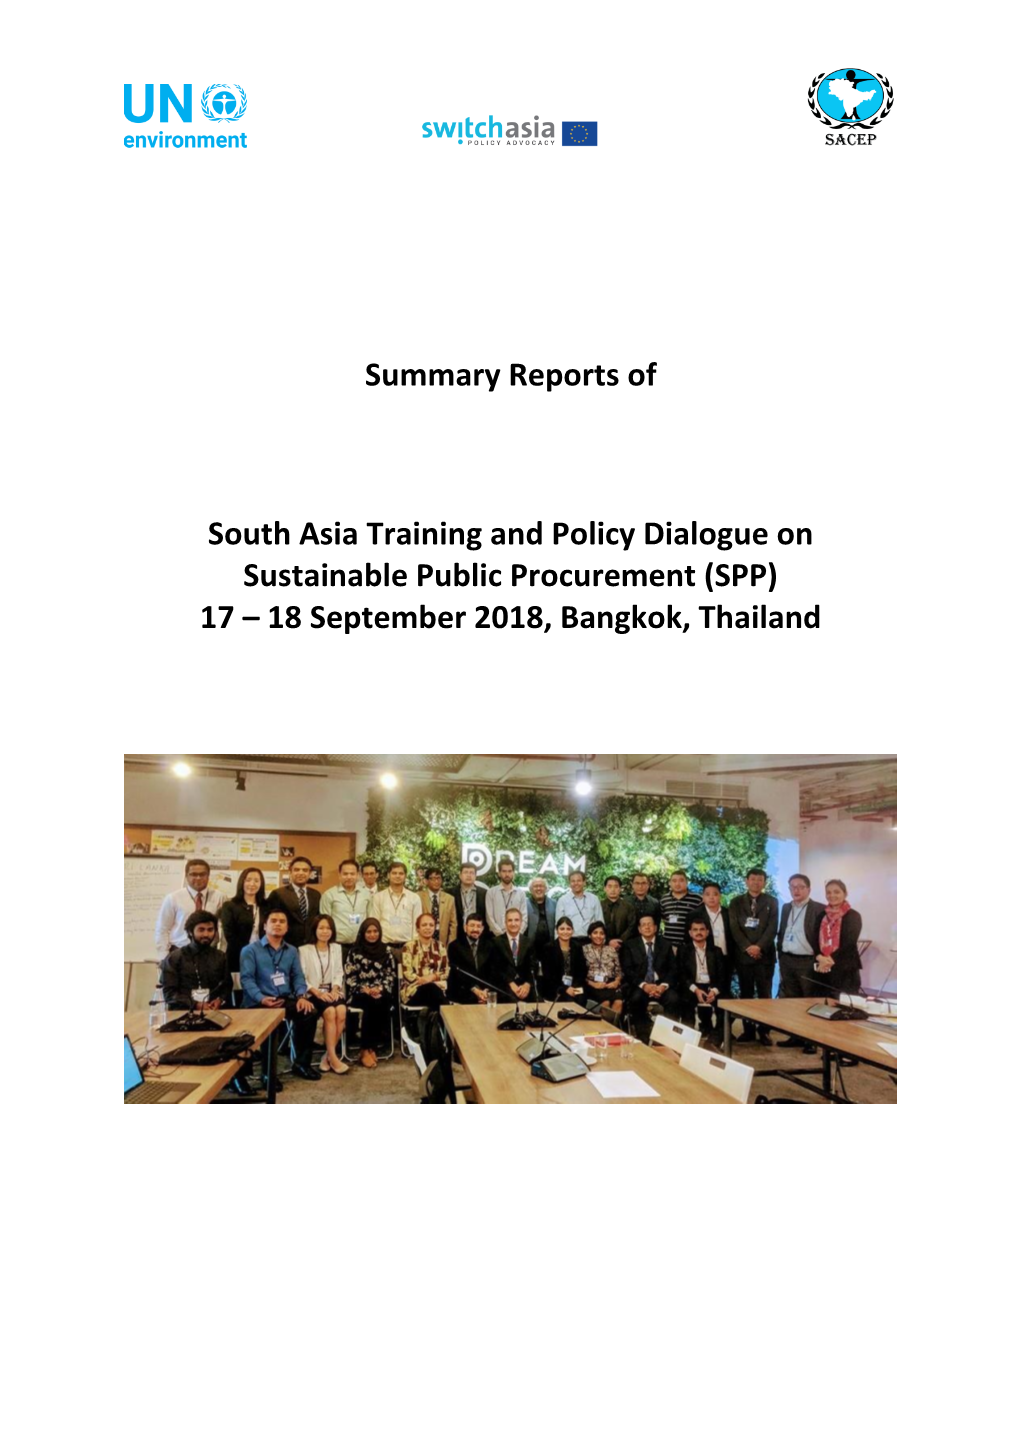 Summary Reports of South Asia Training and Policy